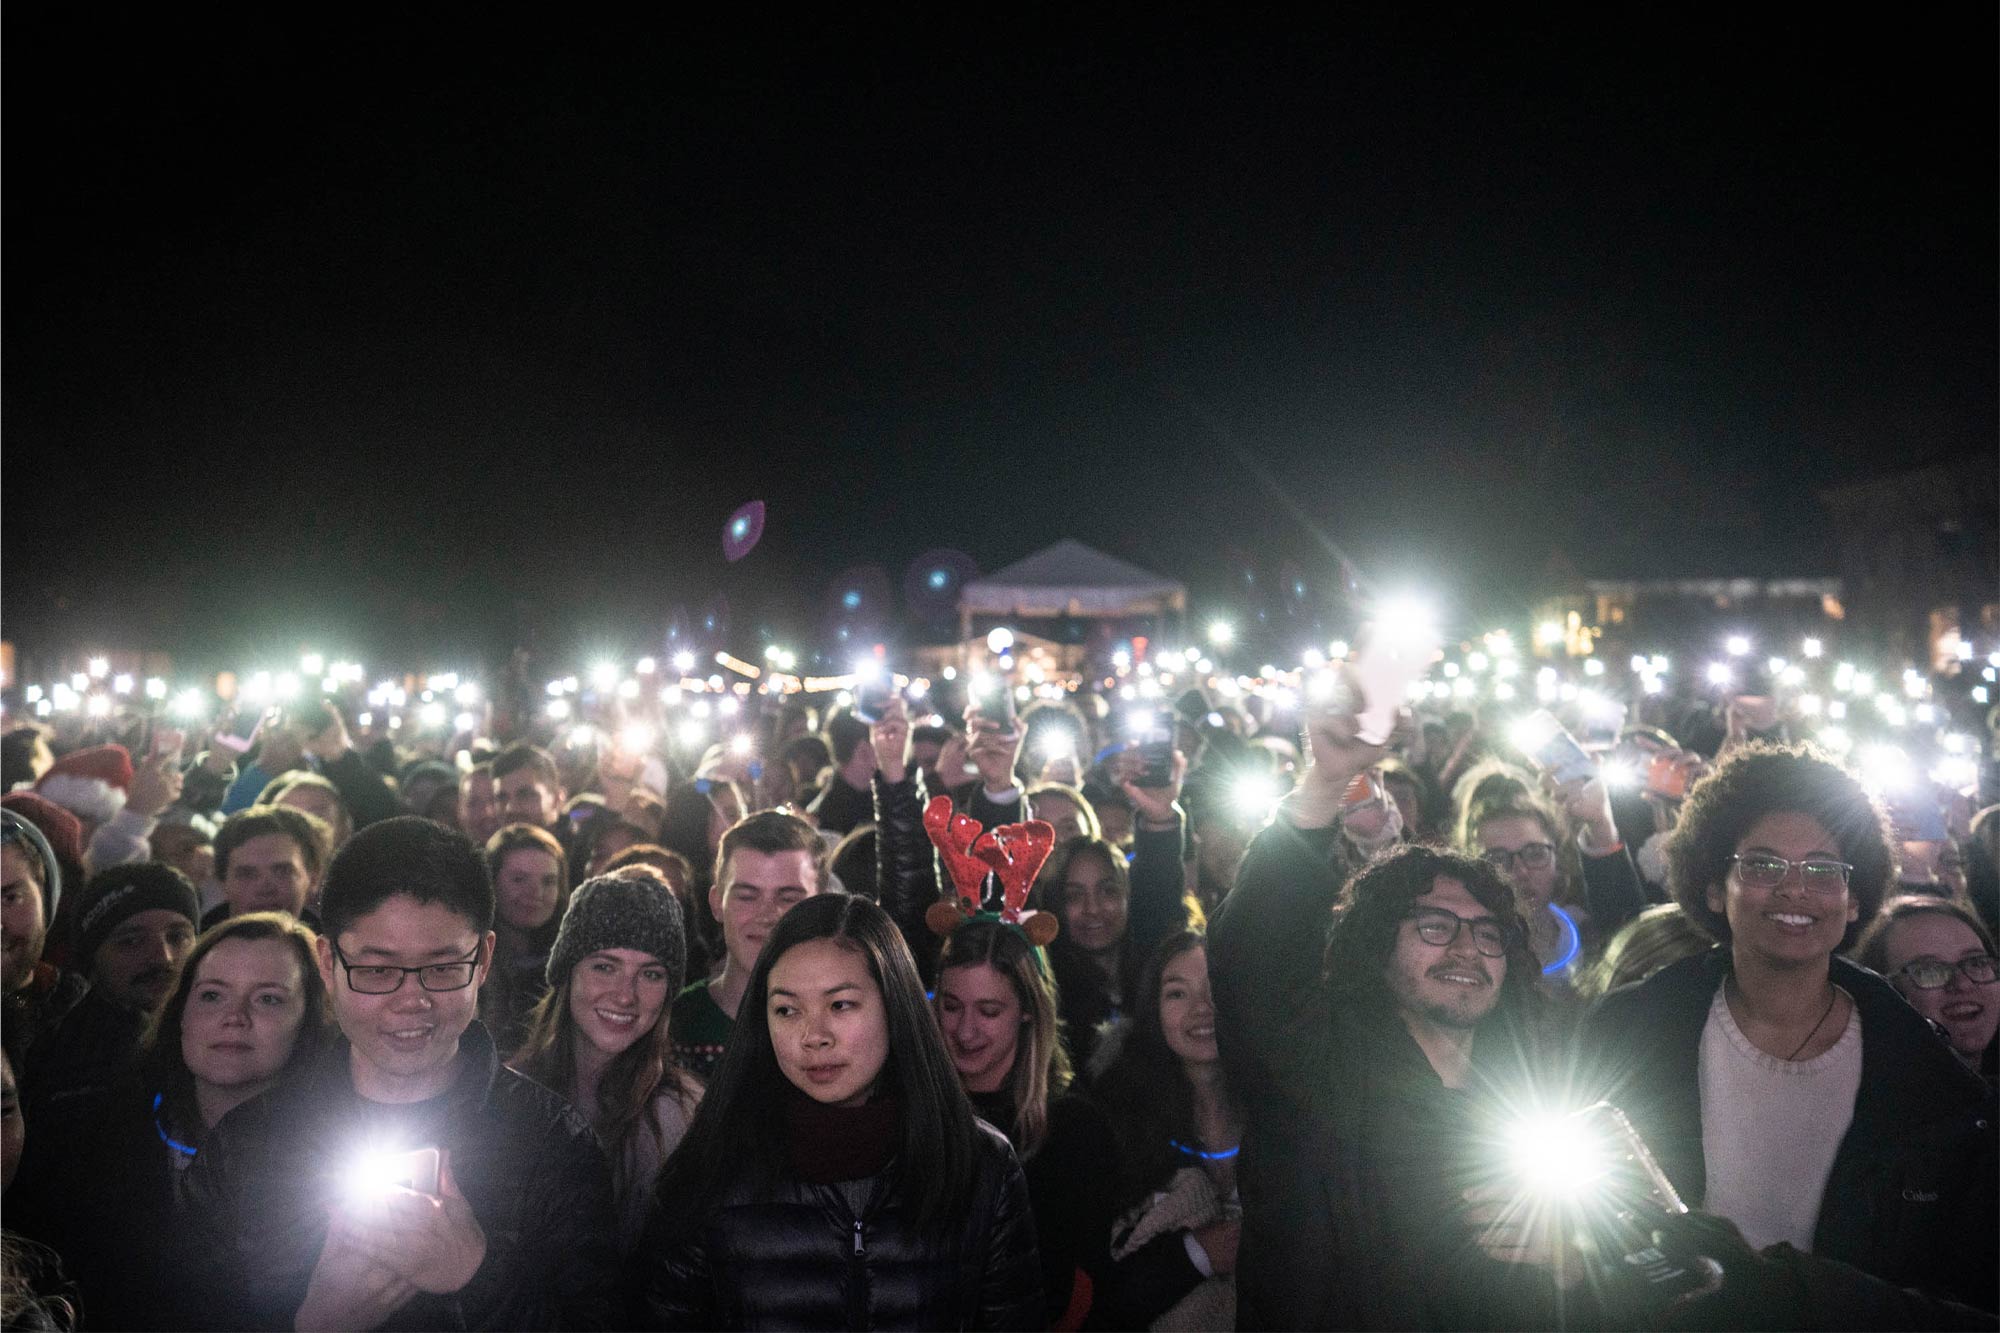 A large group of students in the dark holding lights